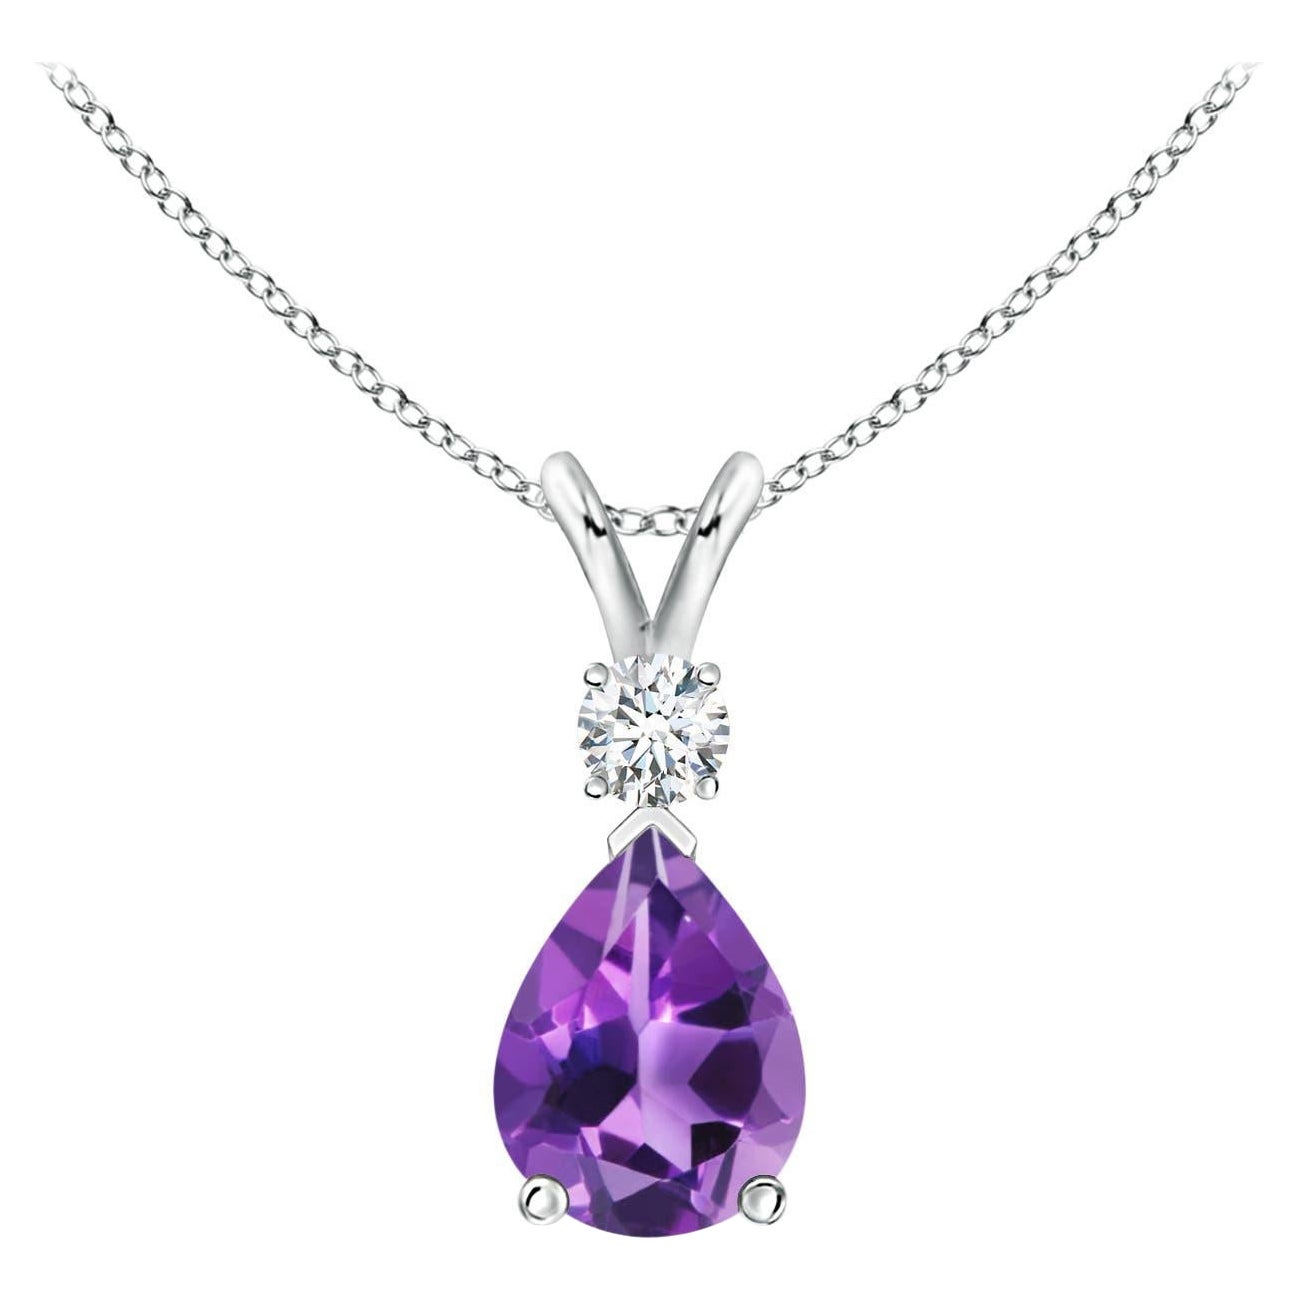 ANGARA Natural 1ct Amethyst Teardrop Pendant with Diamond in 14K White Gold